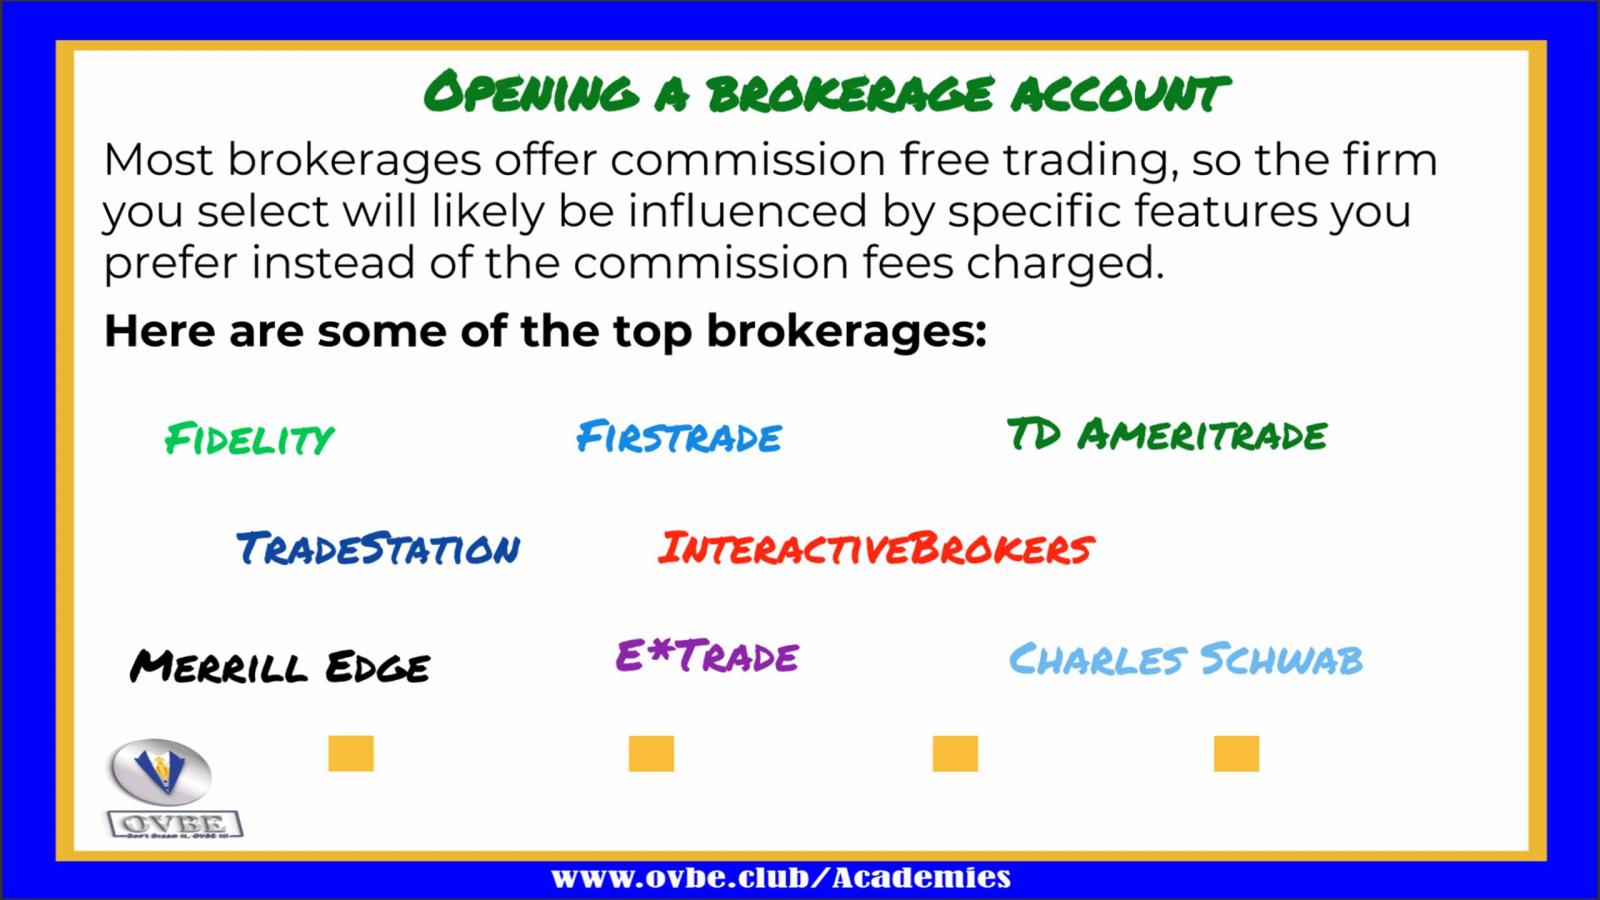 Opening A Brokerage Account pg. 5